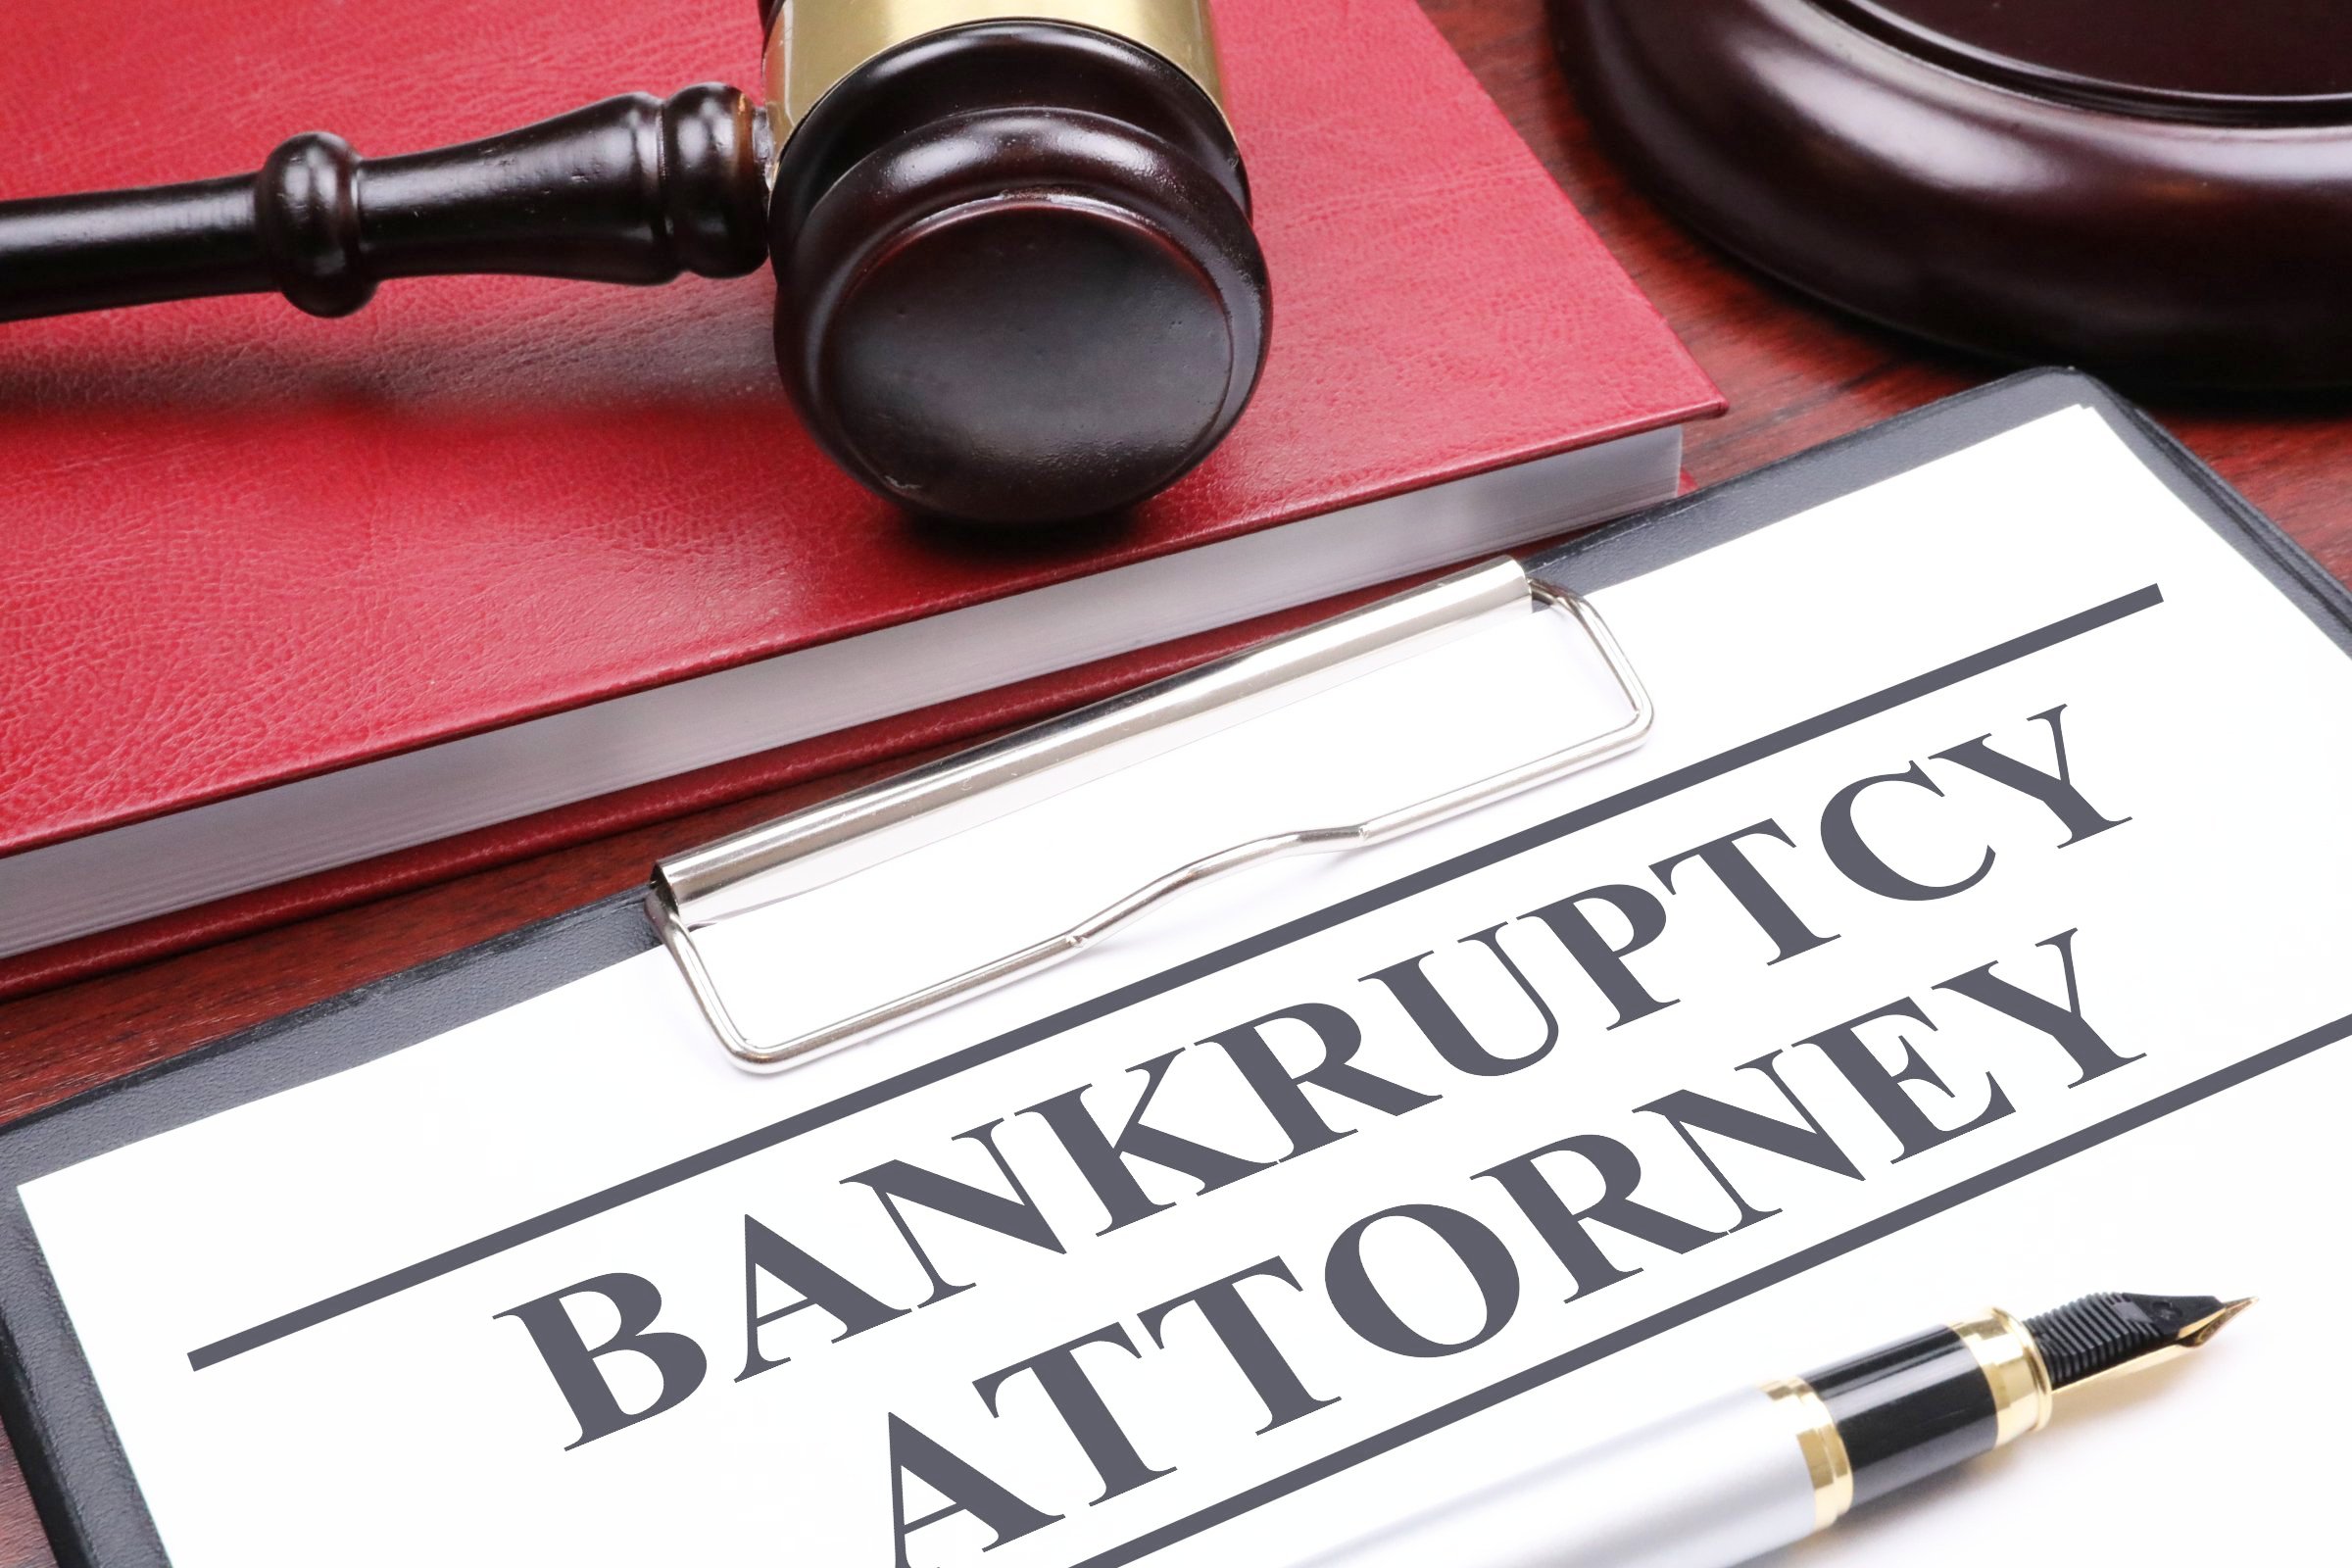 bankruptcy attorney